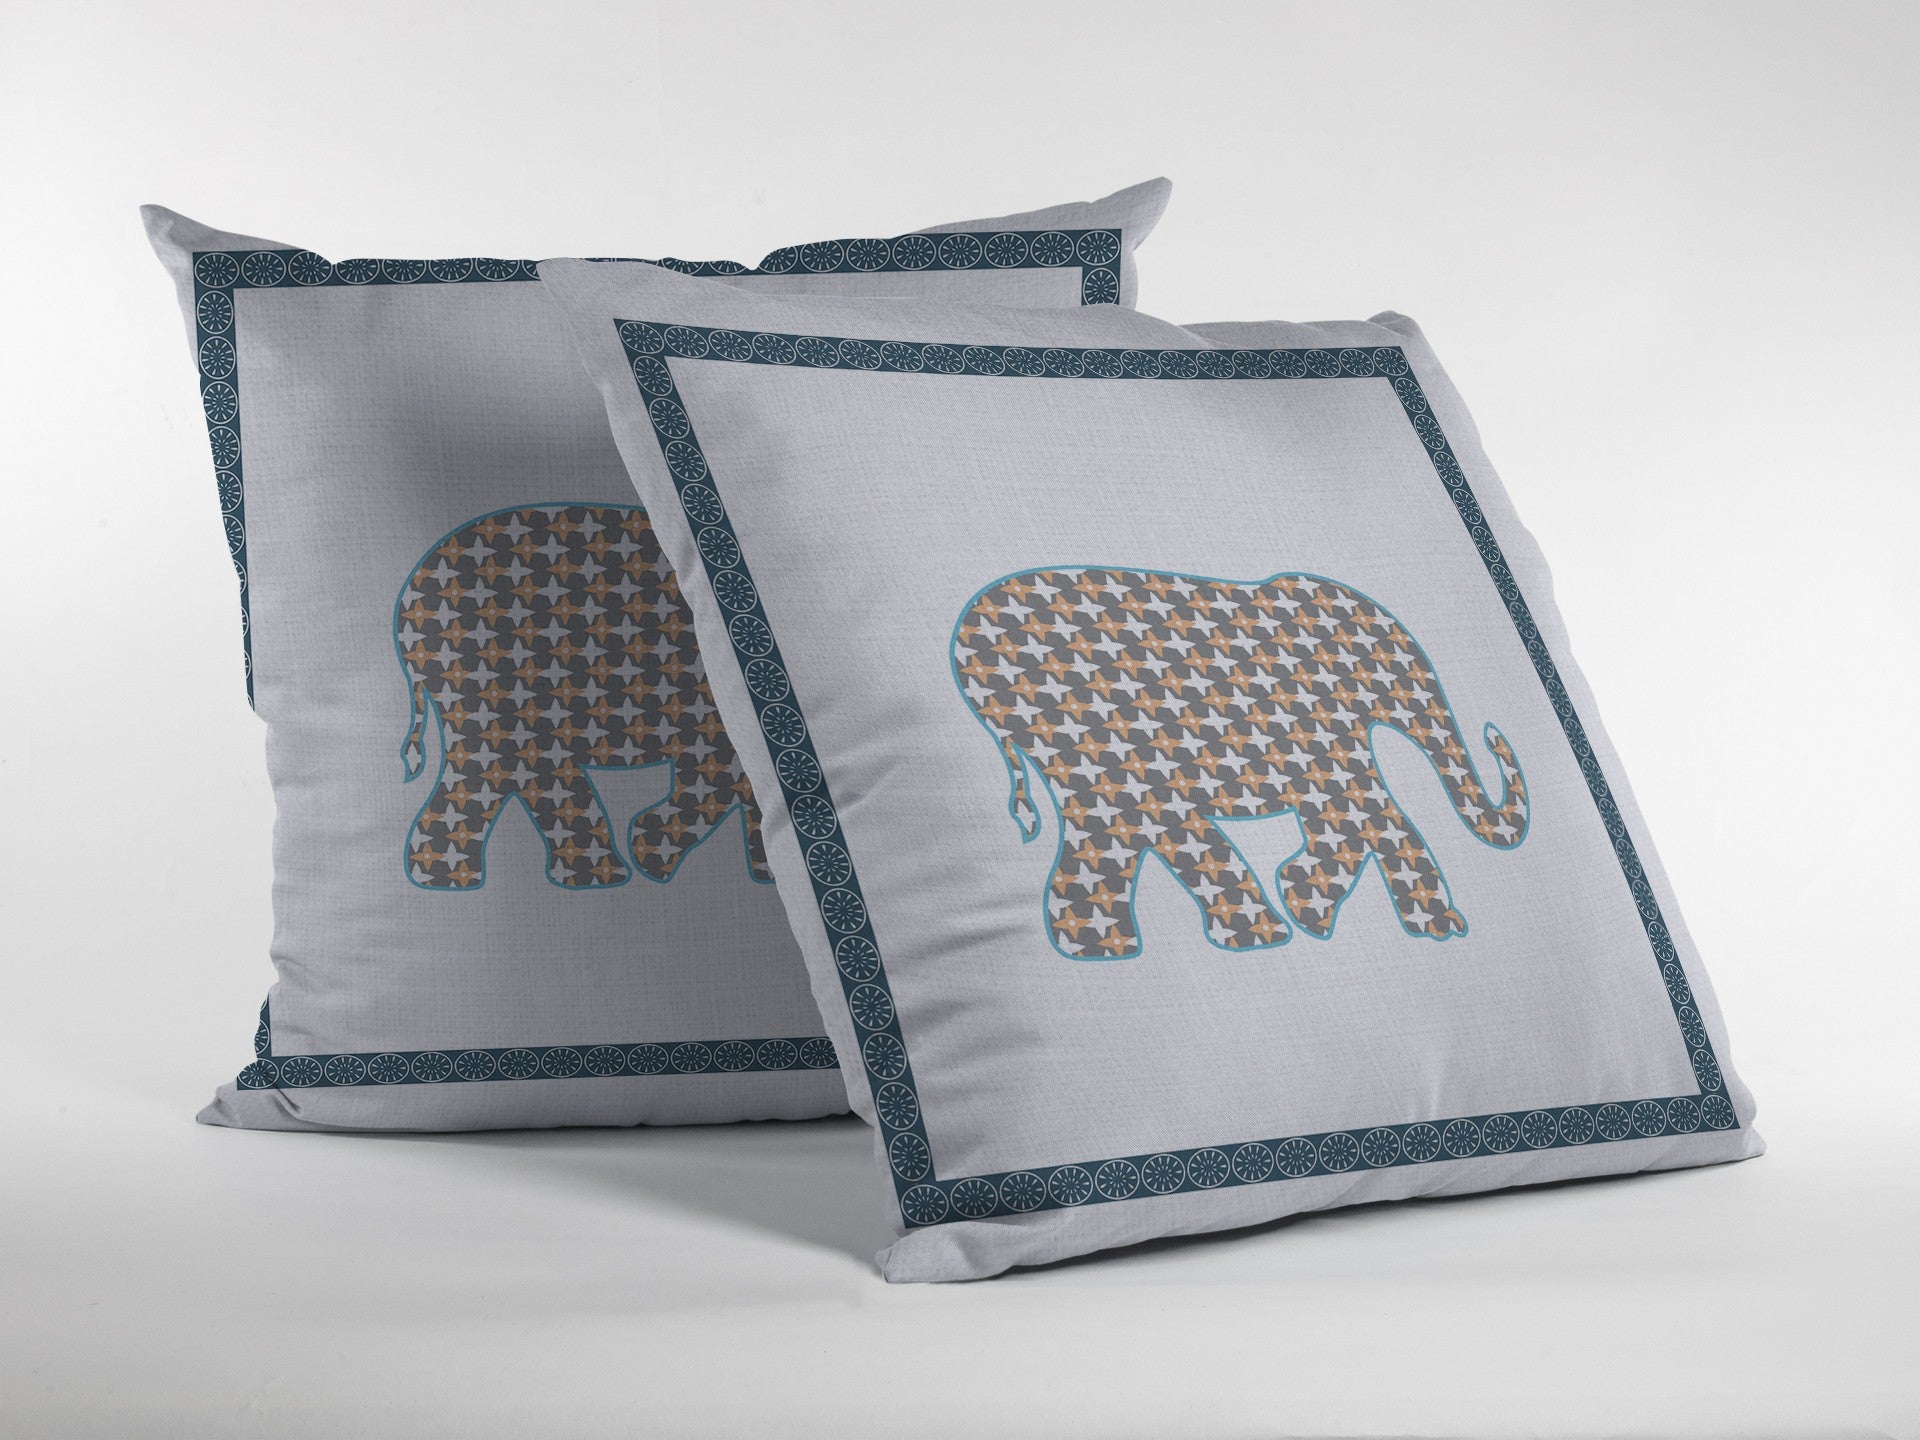 18” Gold White Elephant Indoor Outdoor Throw Pillow